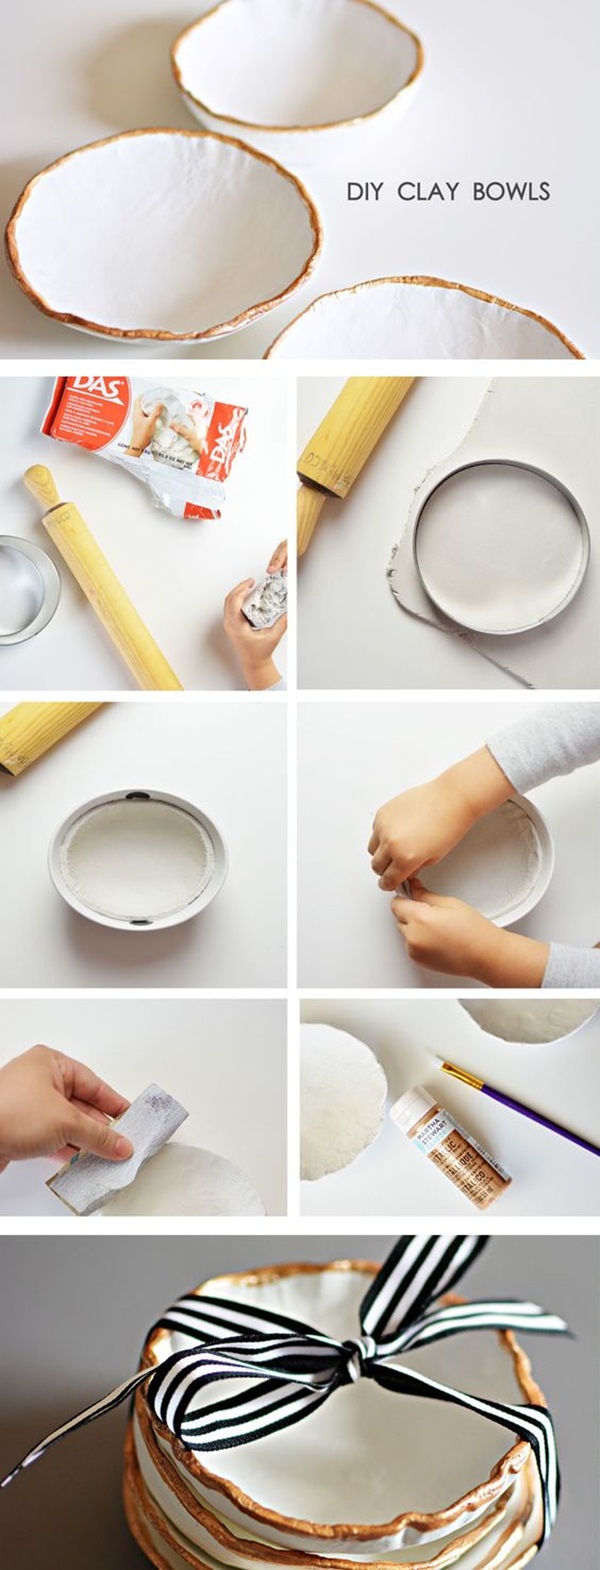 42 Genius Air Dry Clay Projects and Ideas for Kids